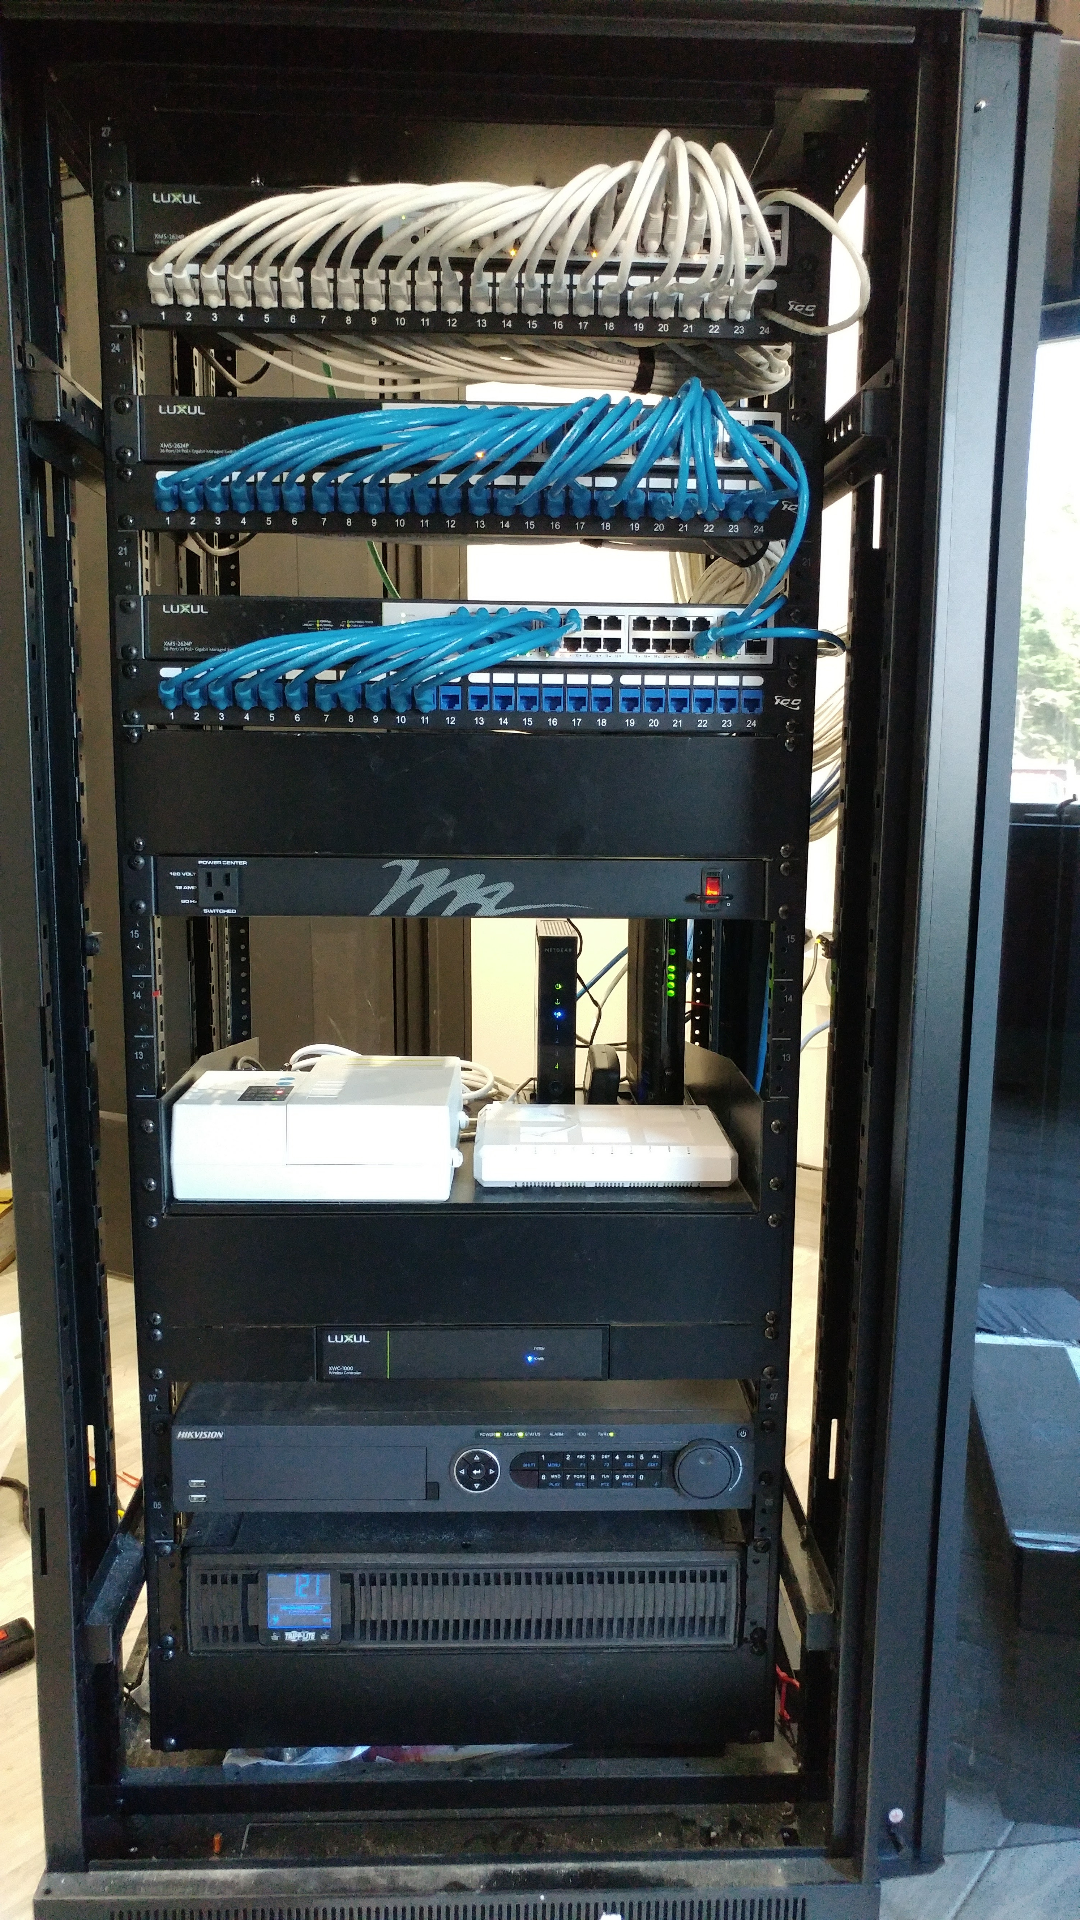 Structured wired cable system in servers